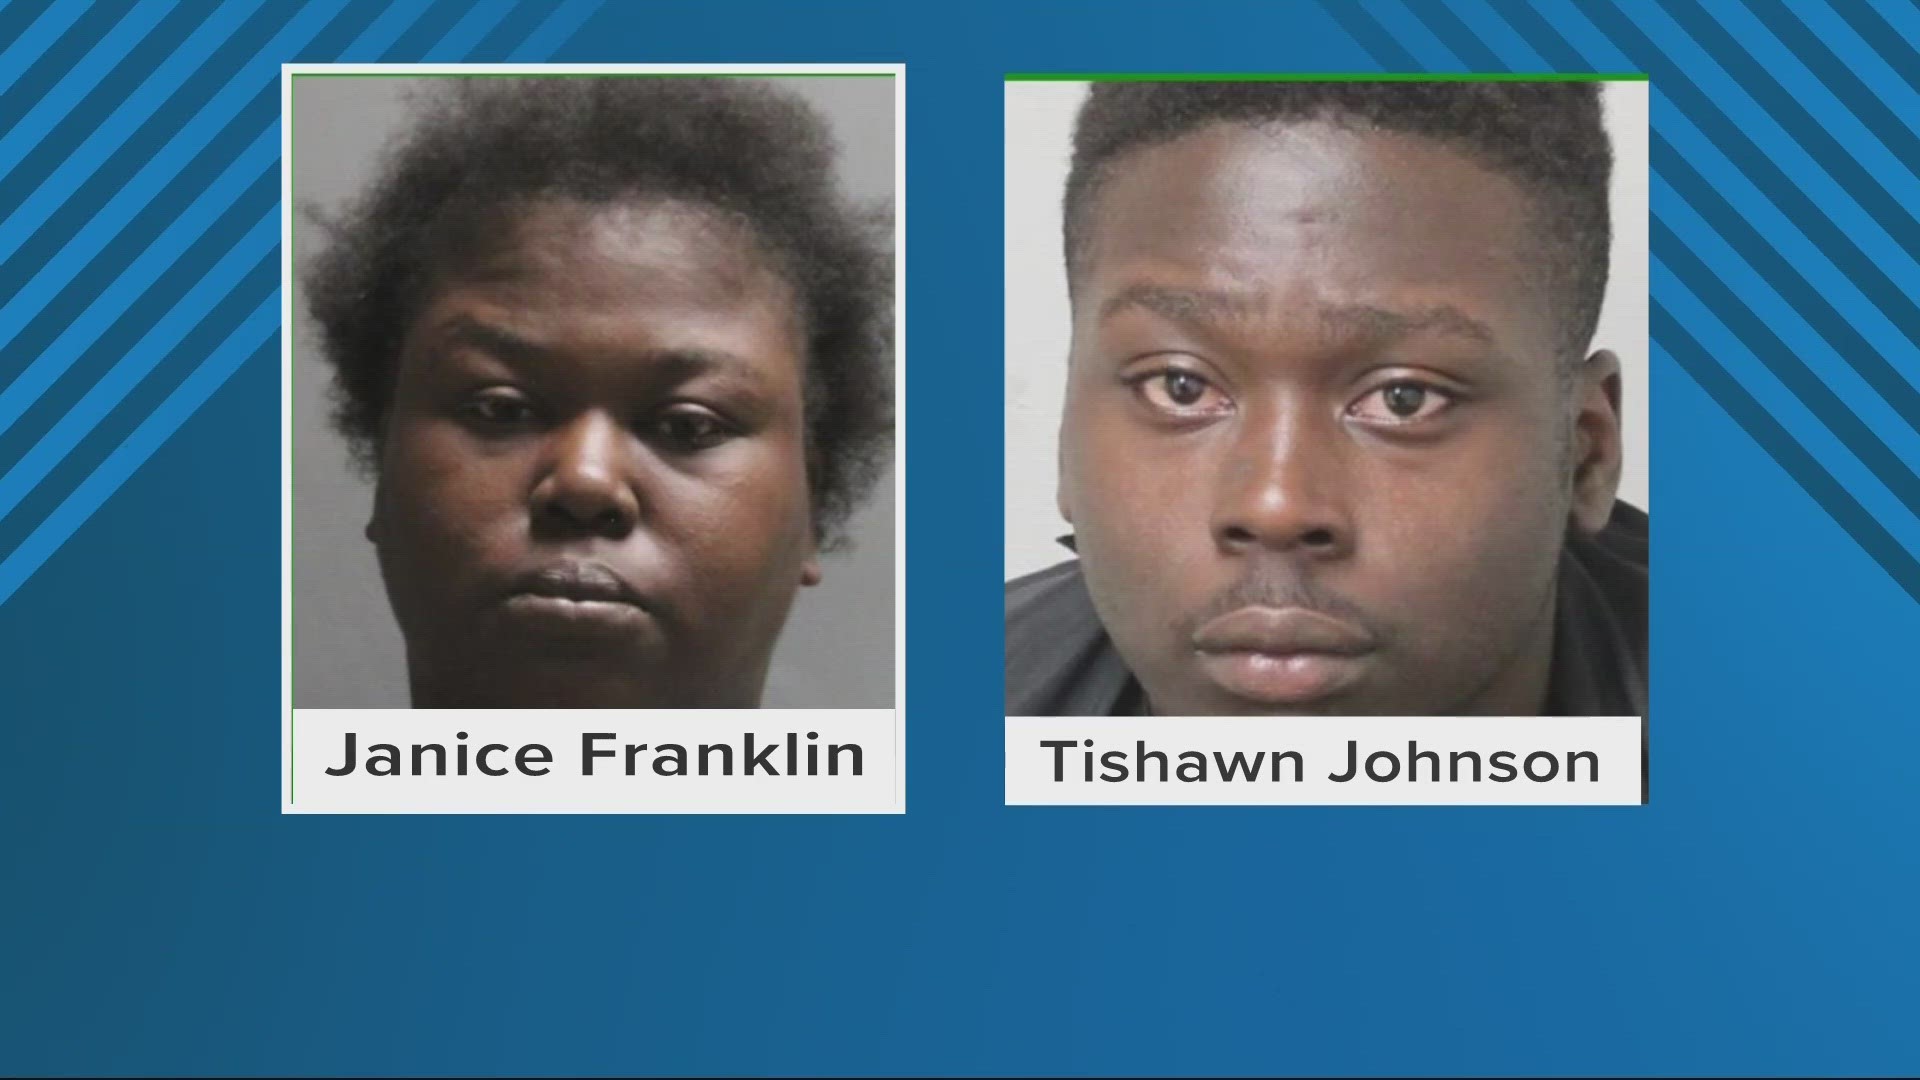 Police have arrested 36-year-old Janice Franklin and 17-year-old Tishawn Johnson for the murder of a man on Jacksonville's westside Wednesday morning.